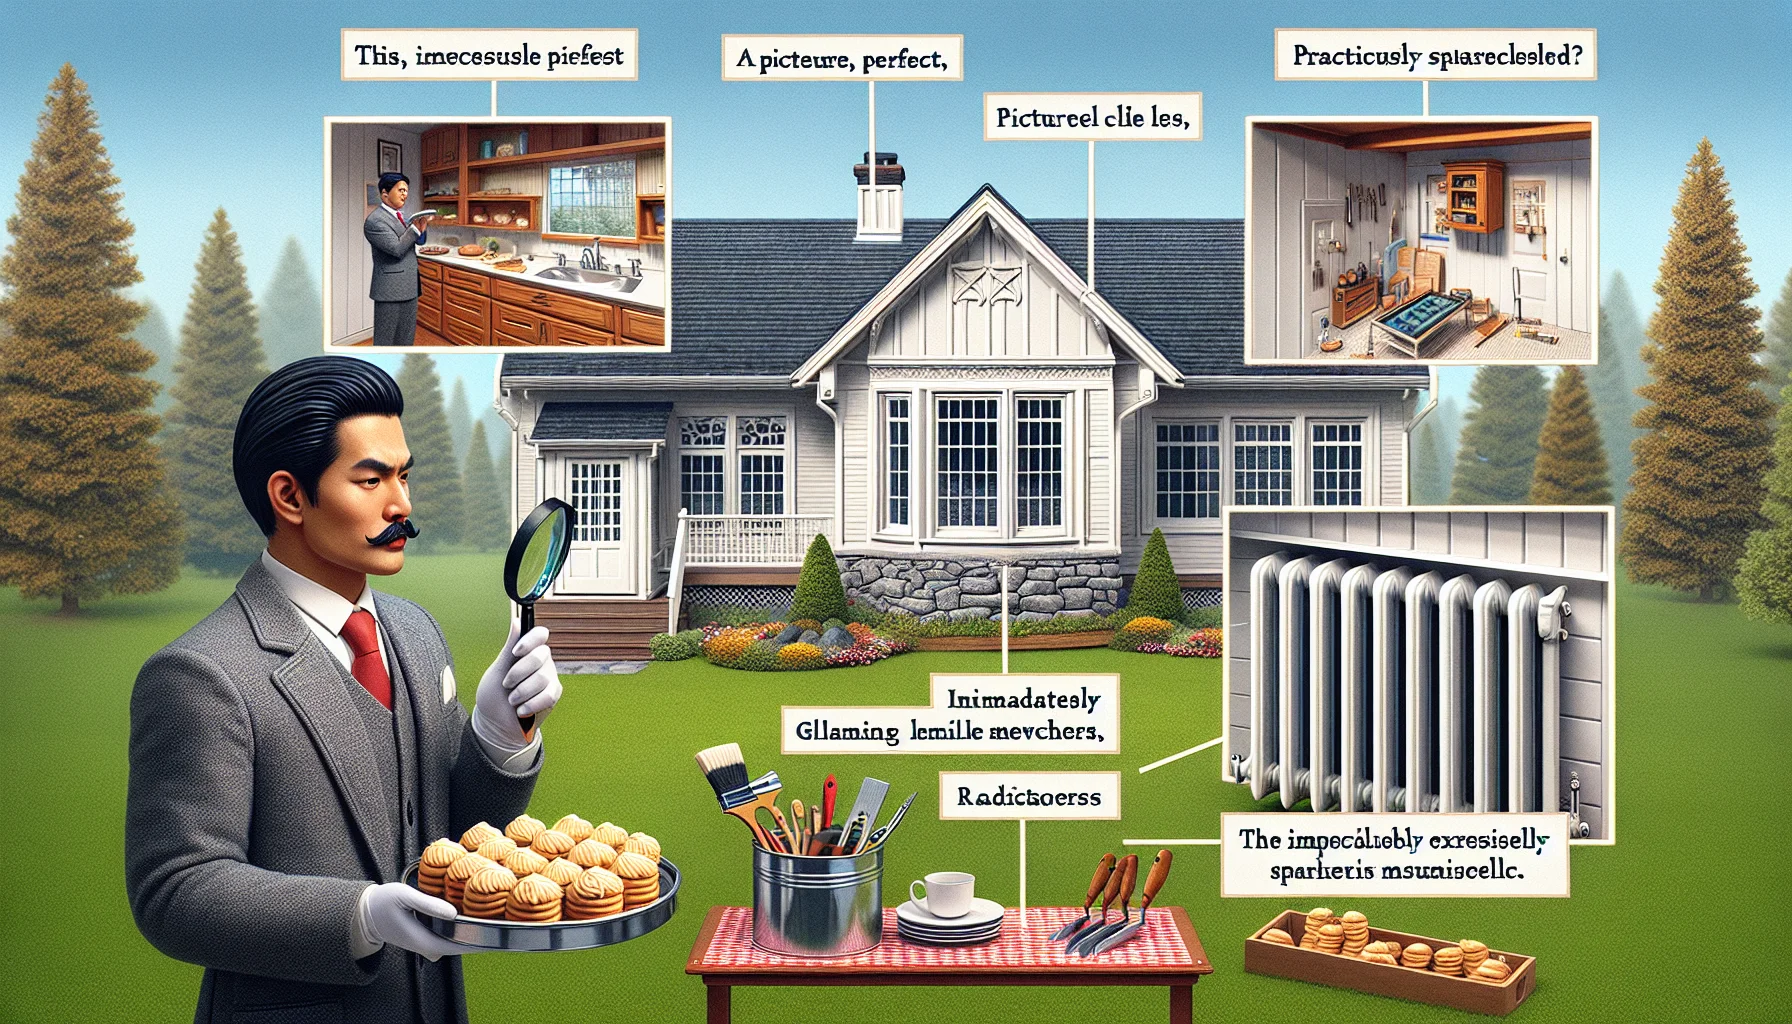 Visualize a humorous and realistic scene representing the ideal home inspection for real estate purposes. Picture a South Asian female inspector with a magnifying glass in one hand, meticulously scanning over a picture-perfect, yet absurdly immaculate home. Background shows a perfectly manicured lawn, a flawless roof, and a foundation that's practically sparkling clean. In the foreground, showcase hilariously exaggerated perfect features such as, radiators impossibly gleaming like mirrors and the impeccably organized tool shed with tools hanging symmetrically. An East Asian male homeowner, looking ridiculously proud, stands by with a tray of freshly baked cookies, indicating an inviting homely atmosphere.